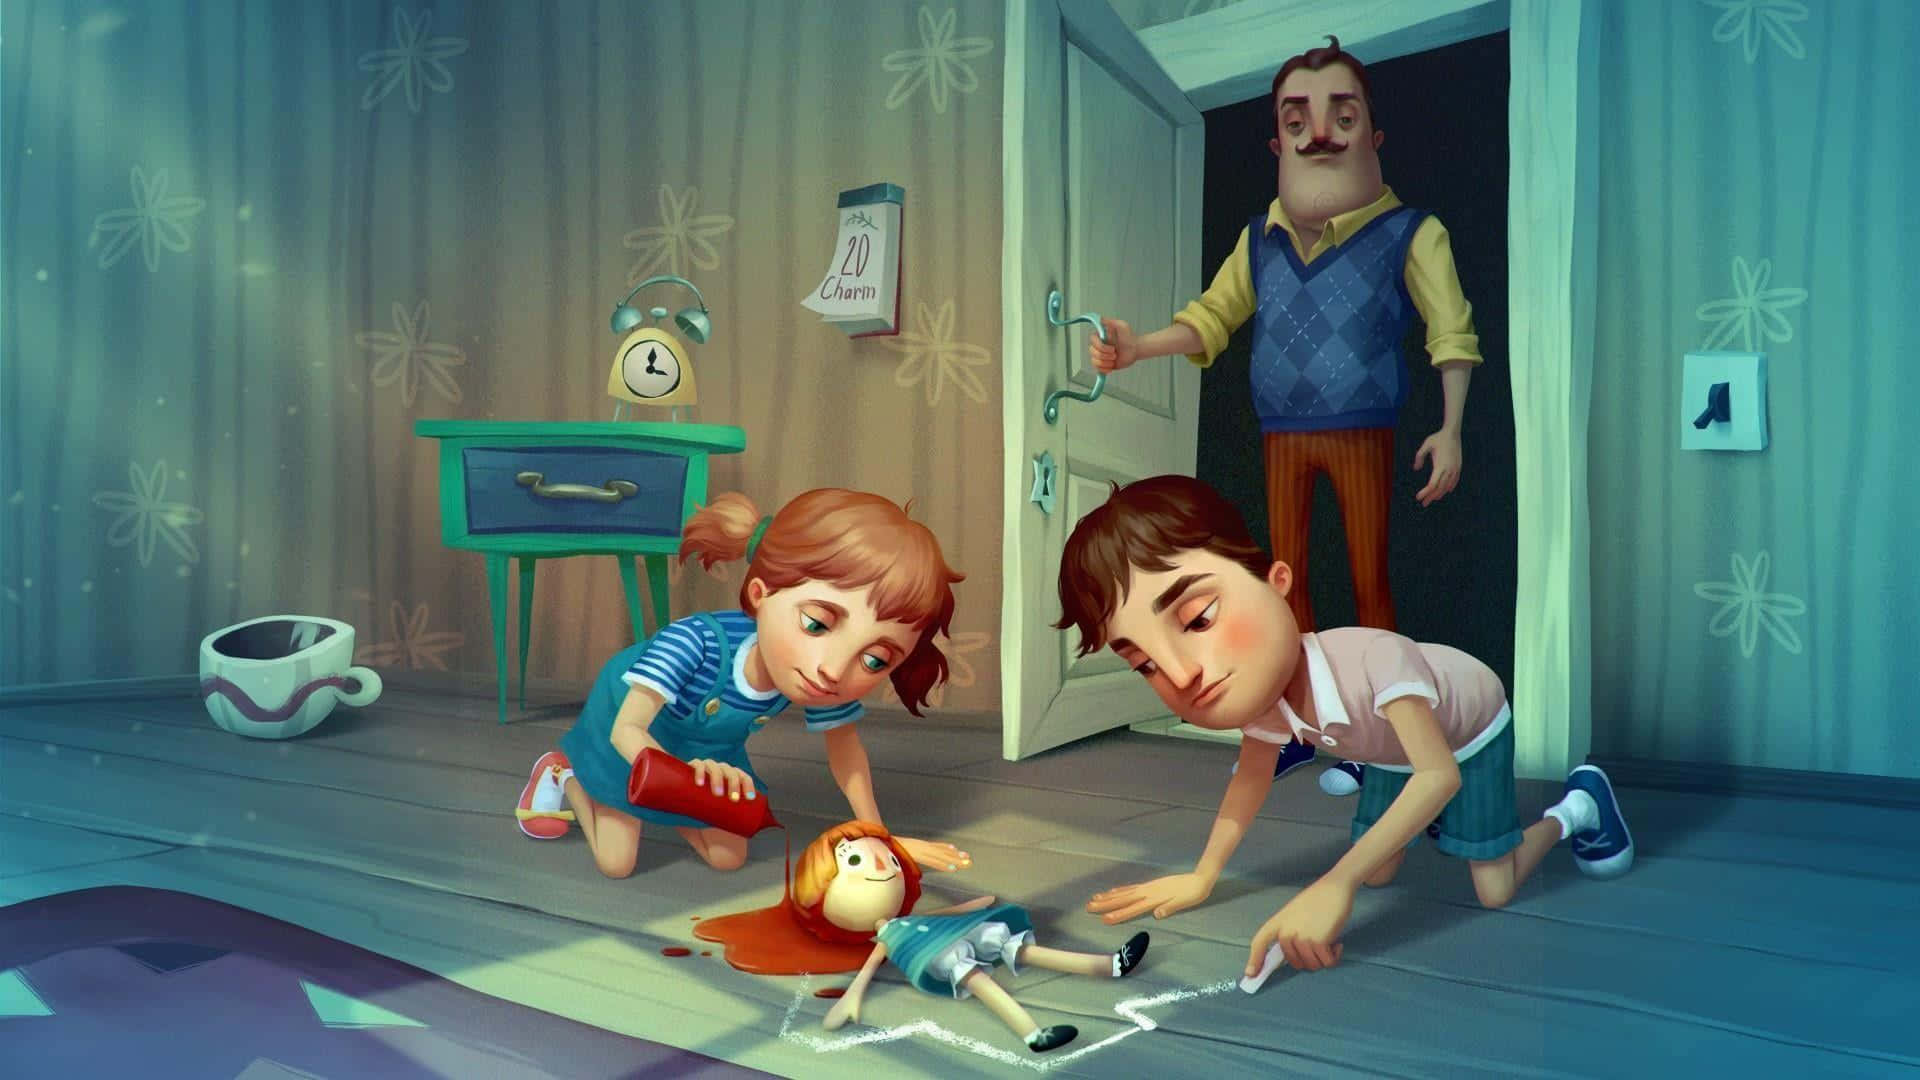 A Cartoon Of A Family In A Room With A Doll Wallpaper